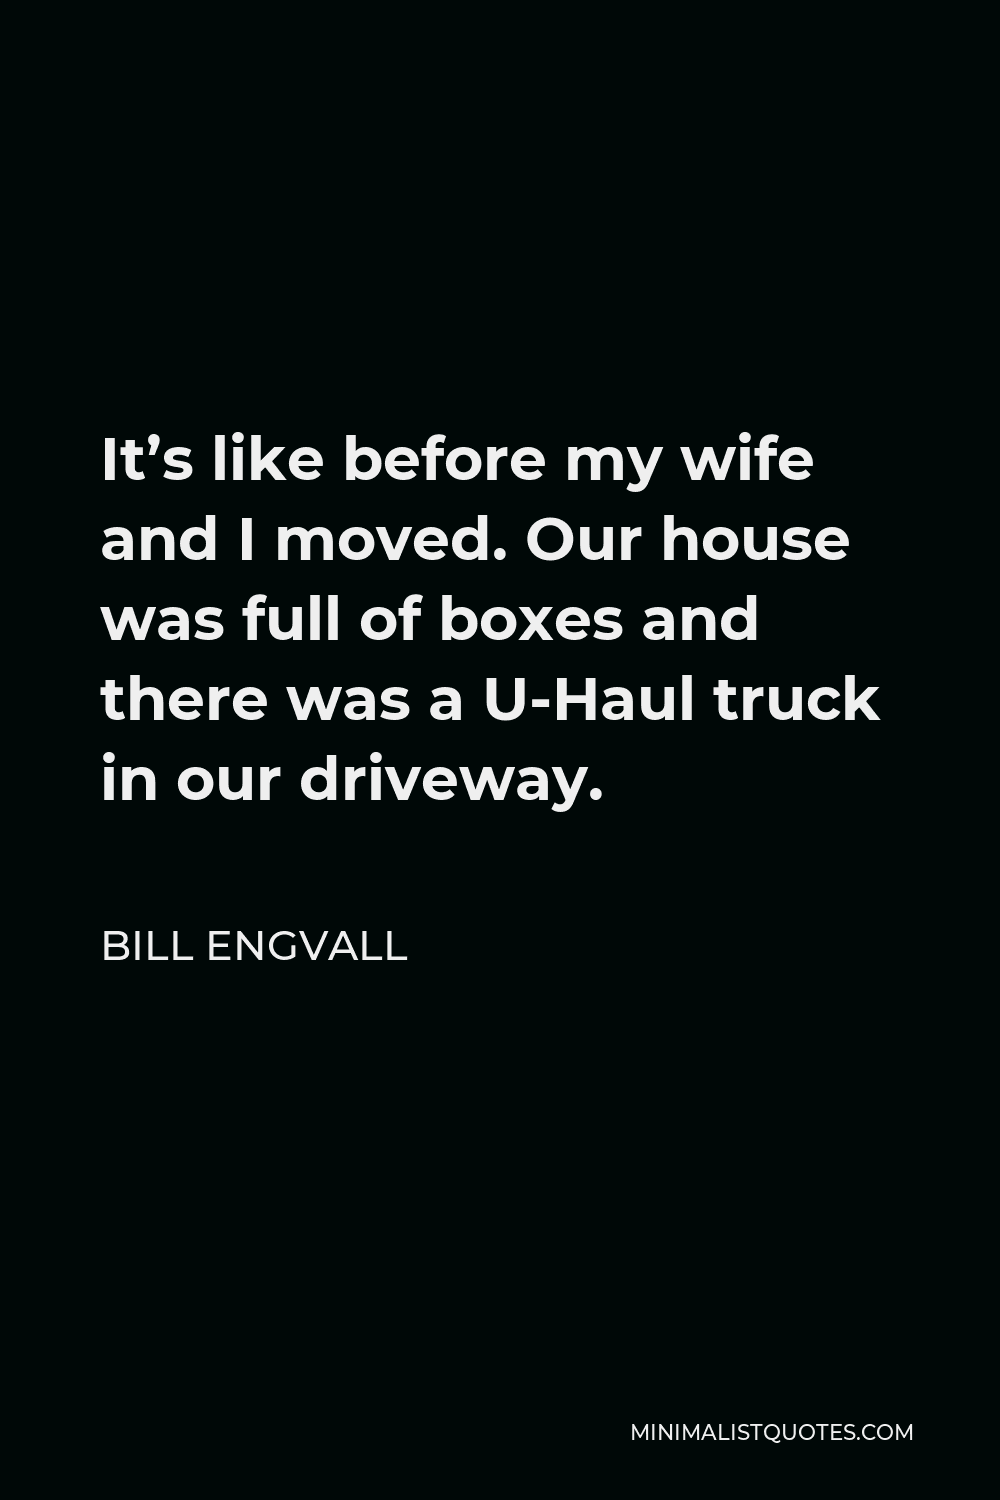 Bill Engvall Quote - It’s like before my wife and I moved. Our house was full of boxes and there was a U-Haul truck in our driveway.